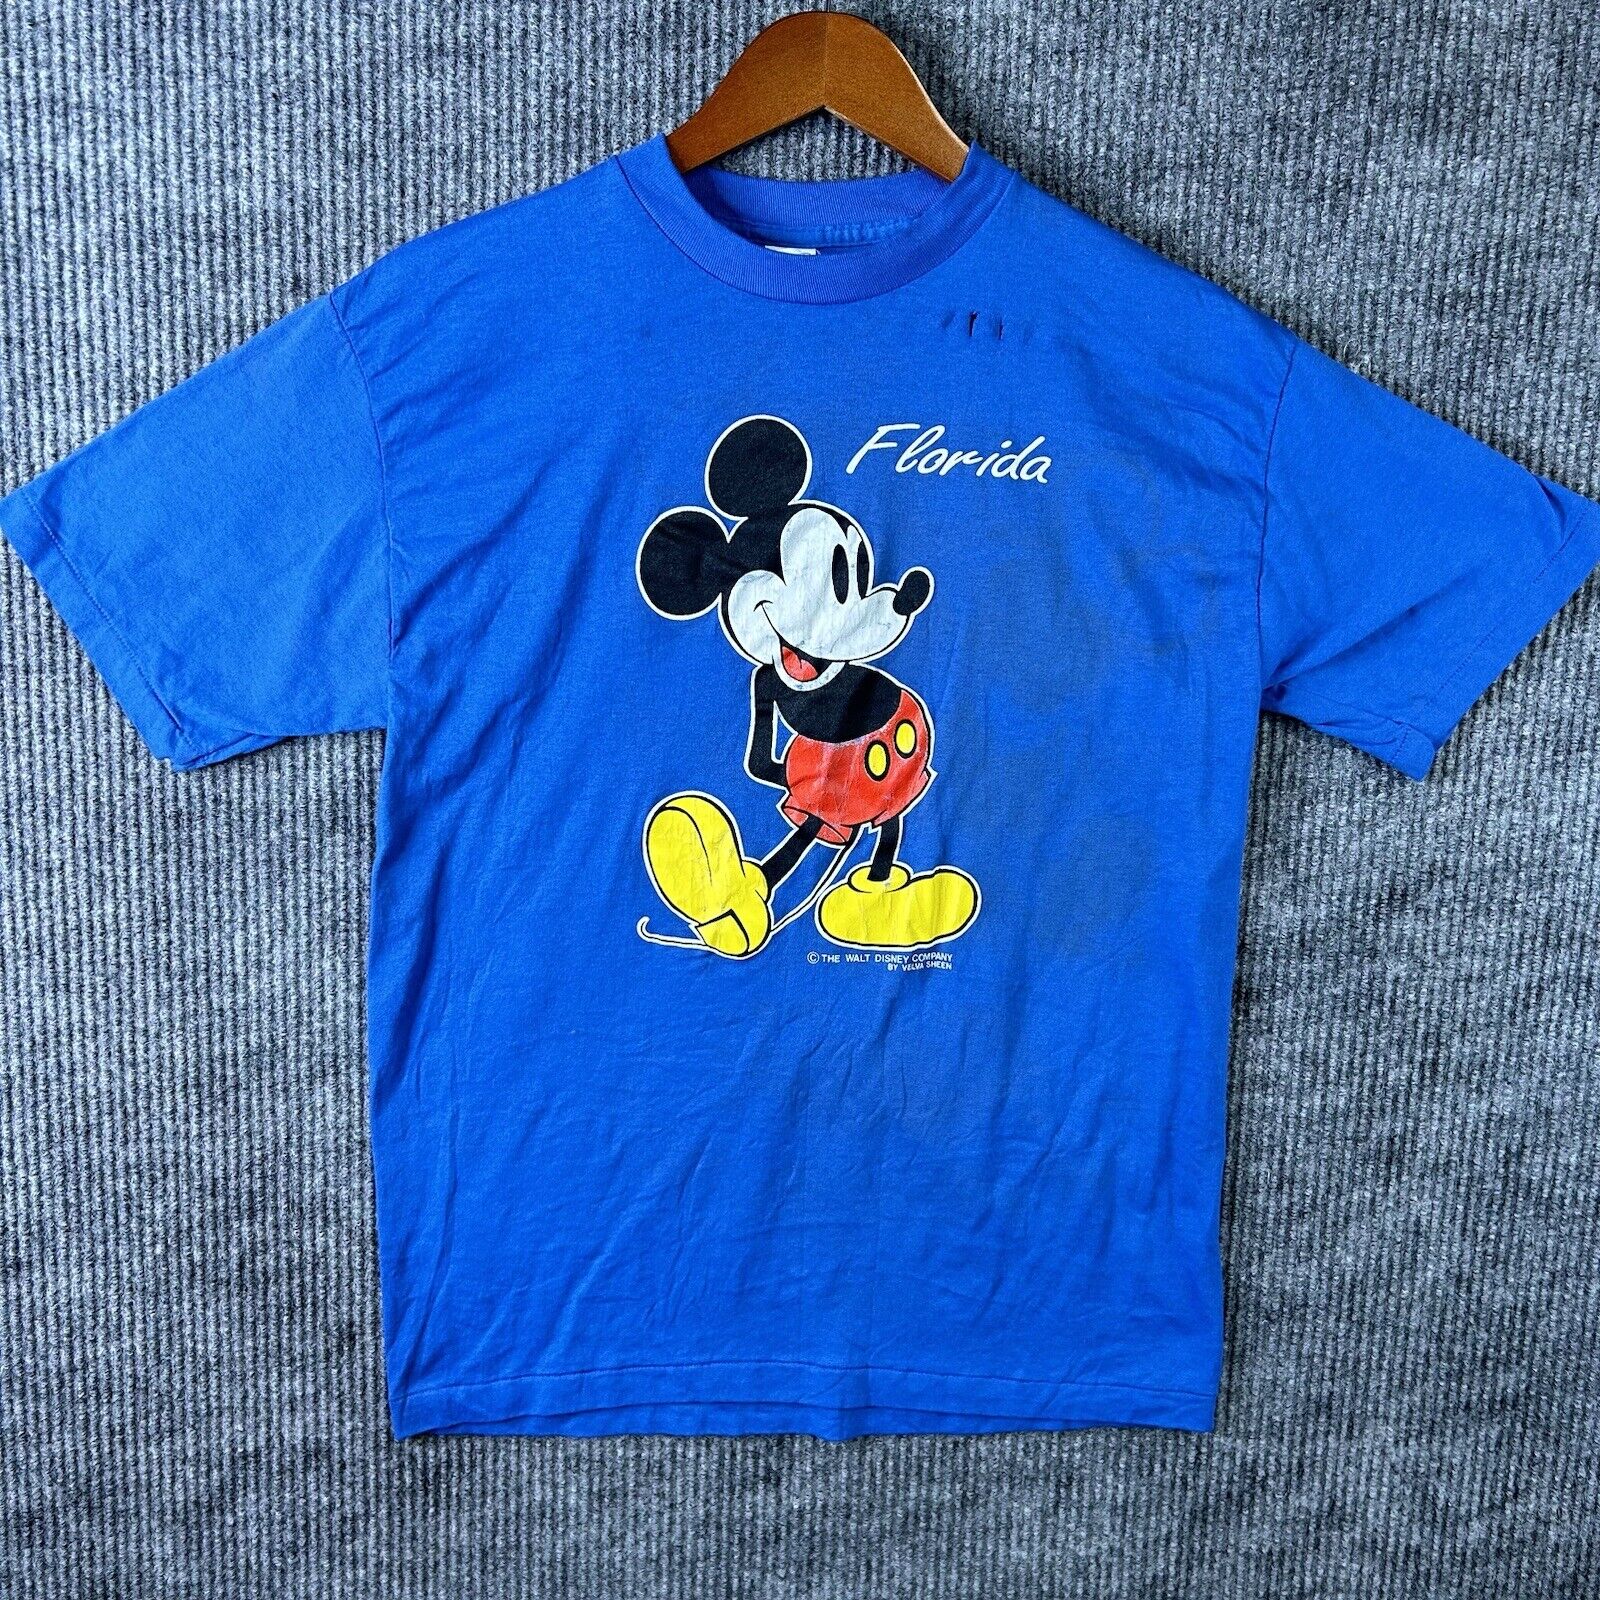 Vtg 1970’s Walt Disney World Florida Mickey Mouse T Shirt Adult L Made In USA